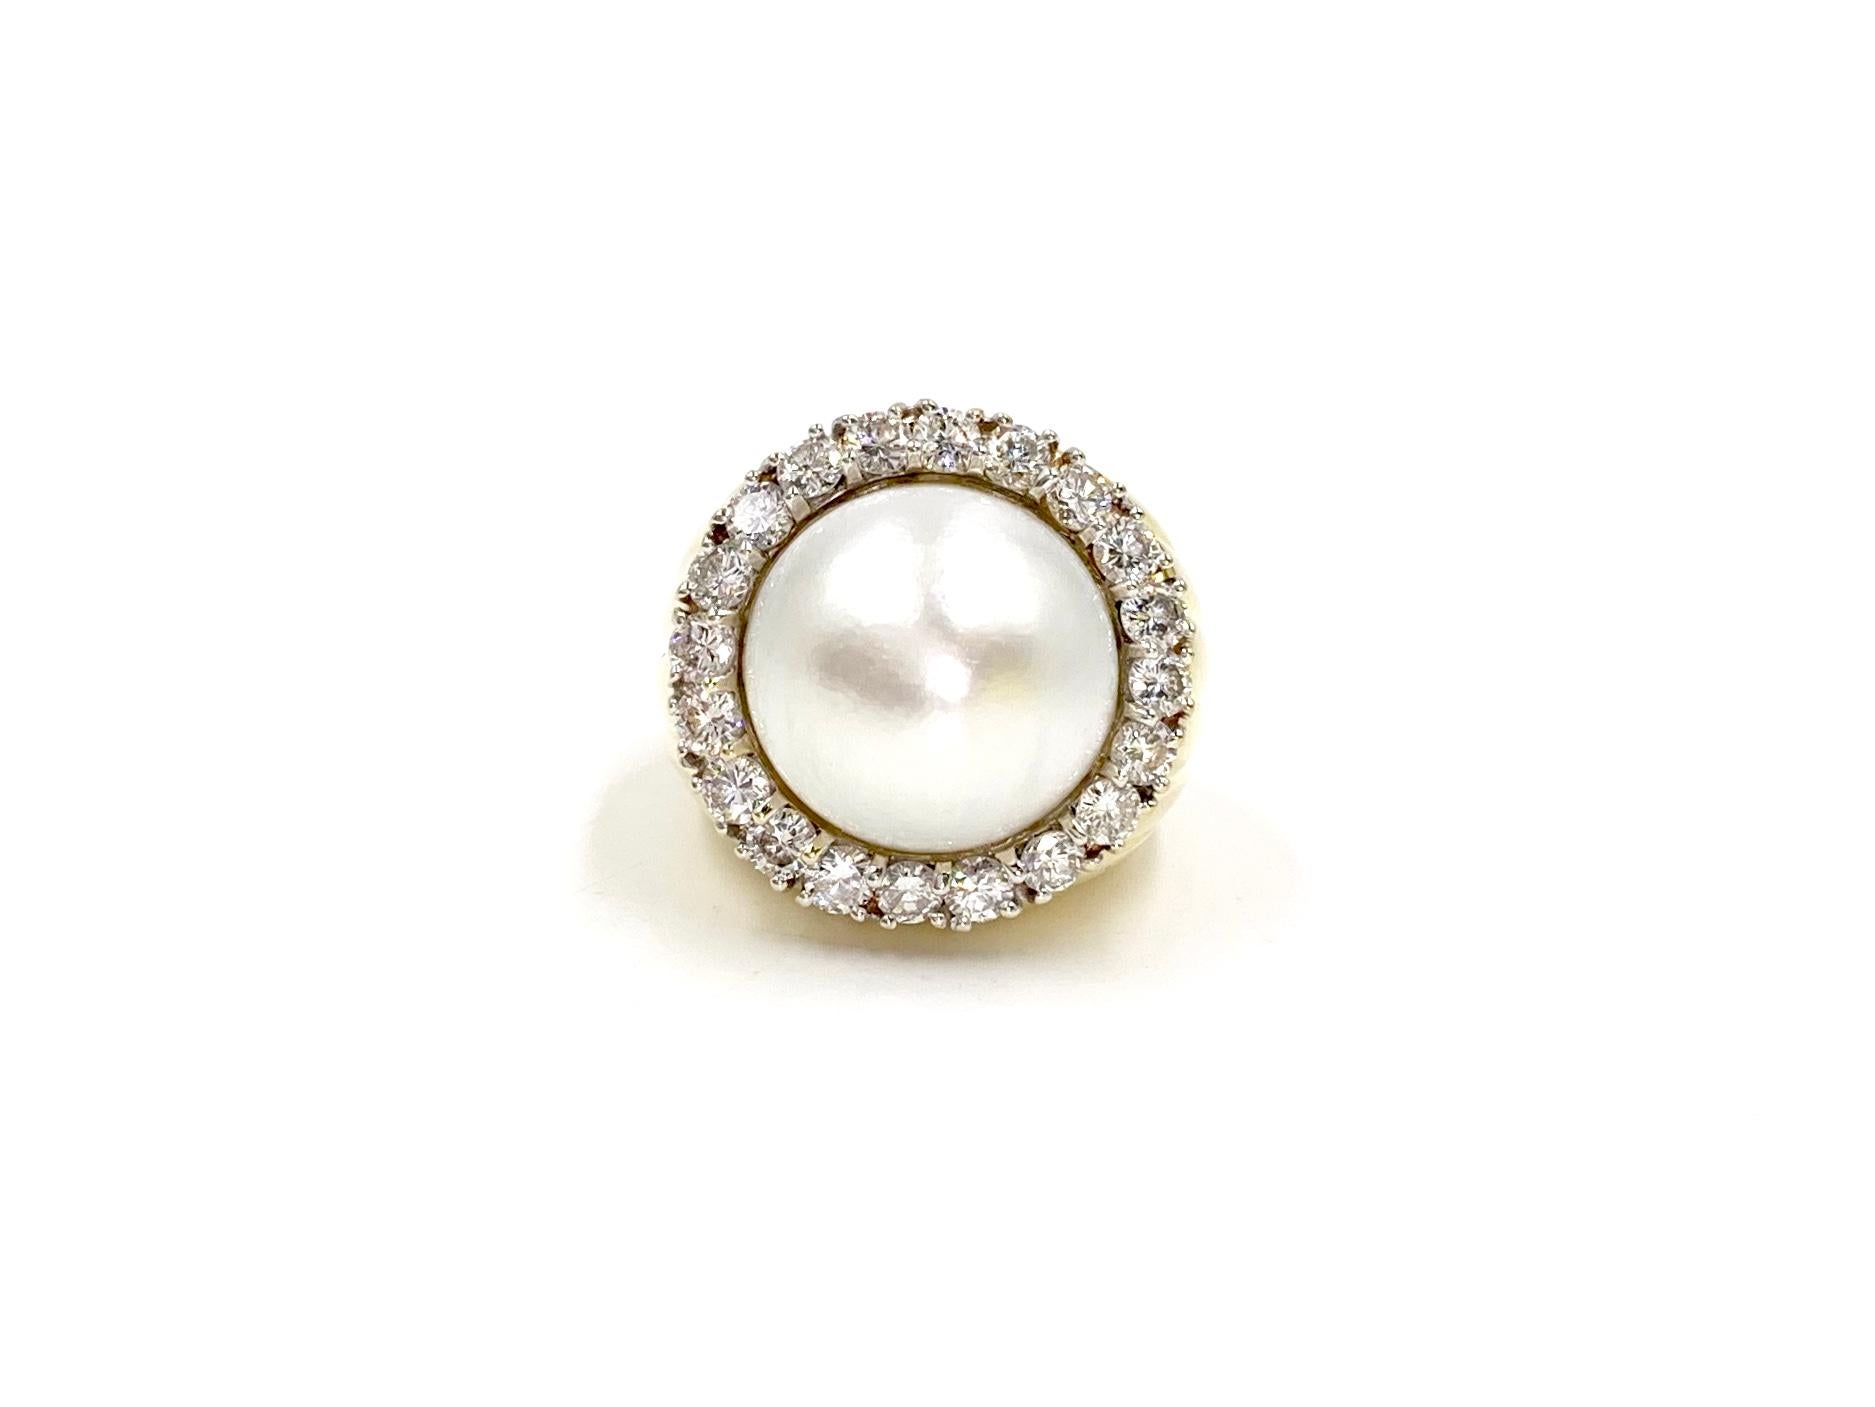 A very well made, heavy and substantial polished 18 karat yellow gold cocktail ring featuring a lustrous cultured white 15mm mabé pearl ring surrounded by 20 round brilliant diamonds at 1.83 carats total weight. Diamond quality is approximately G-H